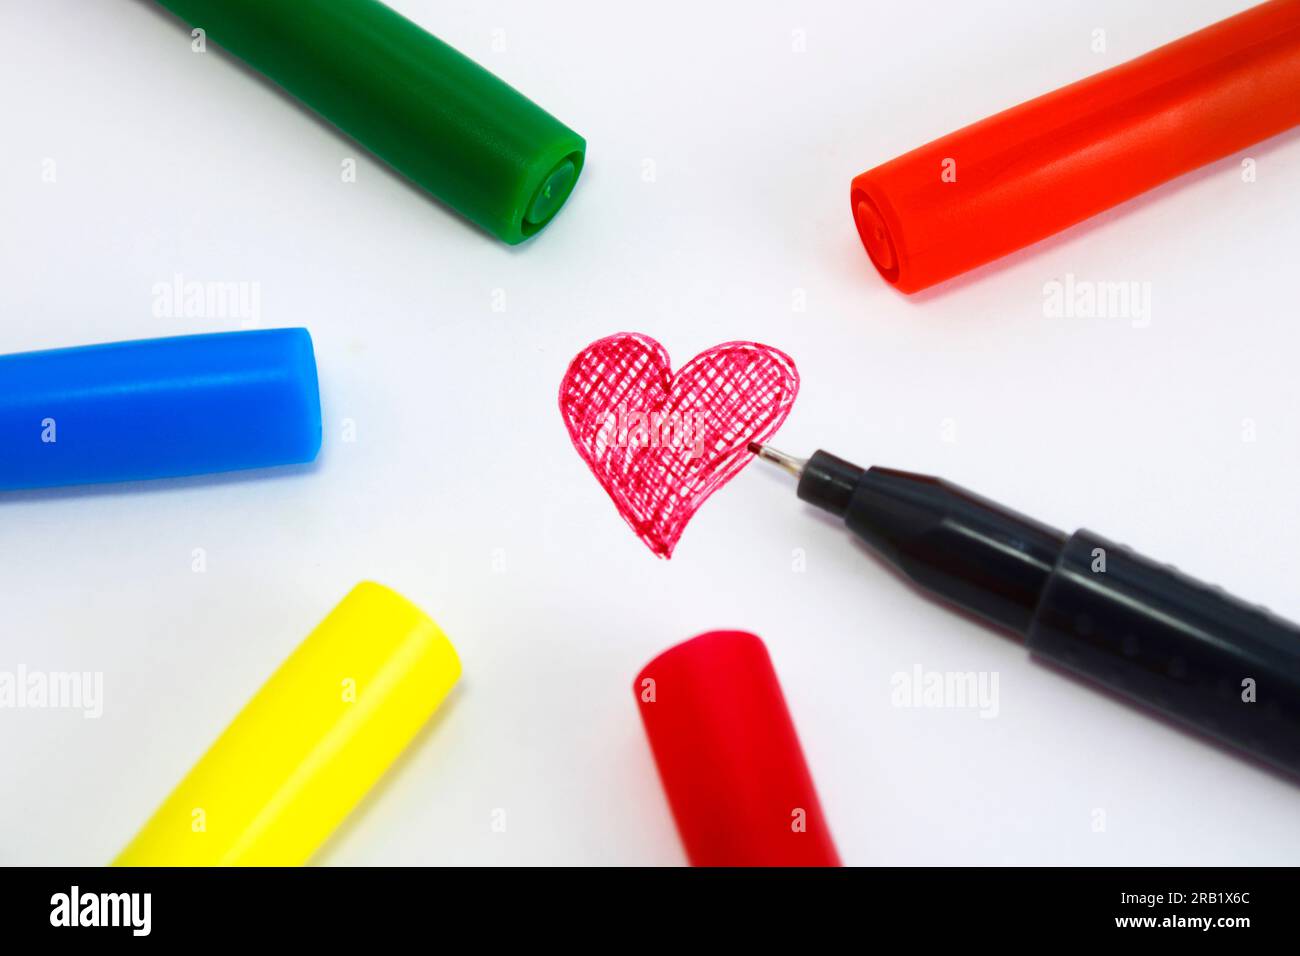 Heart drawn with fine line graph pen, drawing that represents the love for art Stock Photo